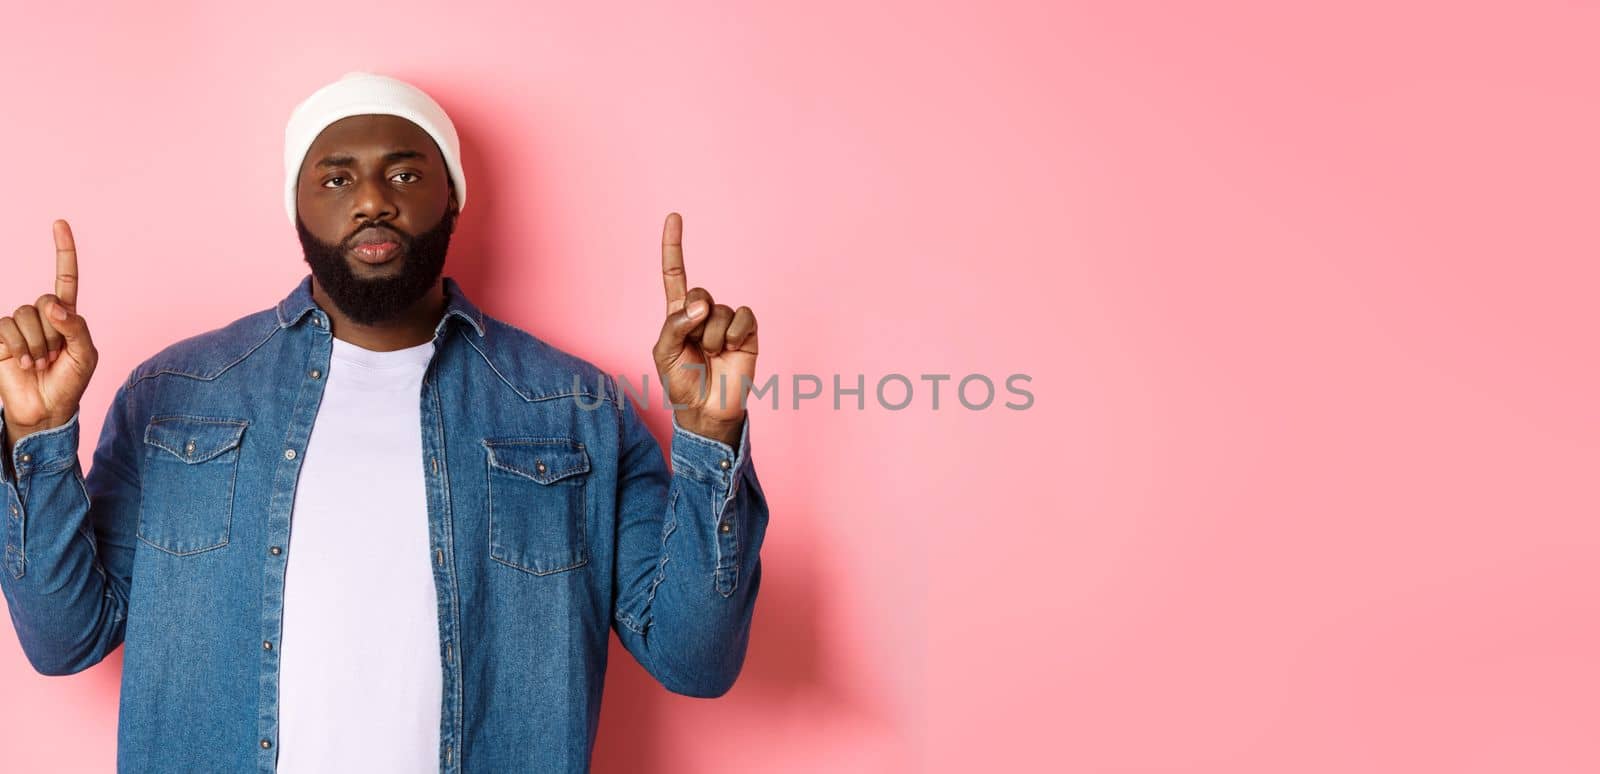 Serious and bothered Black man with beard, staring at camera and pointing fingers up, showing promo, standing over pink background.